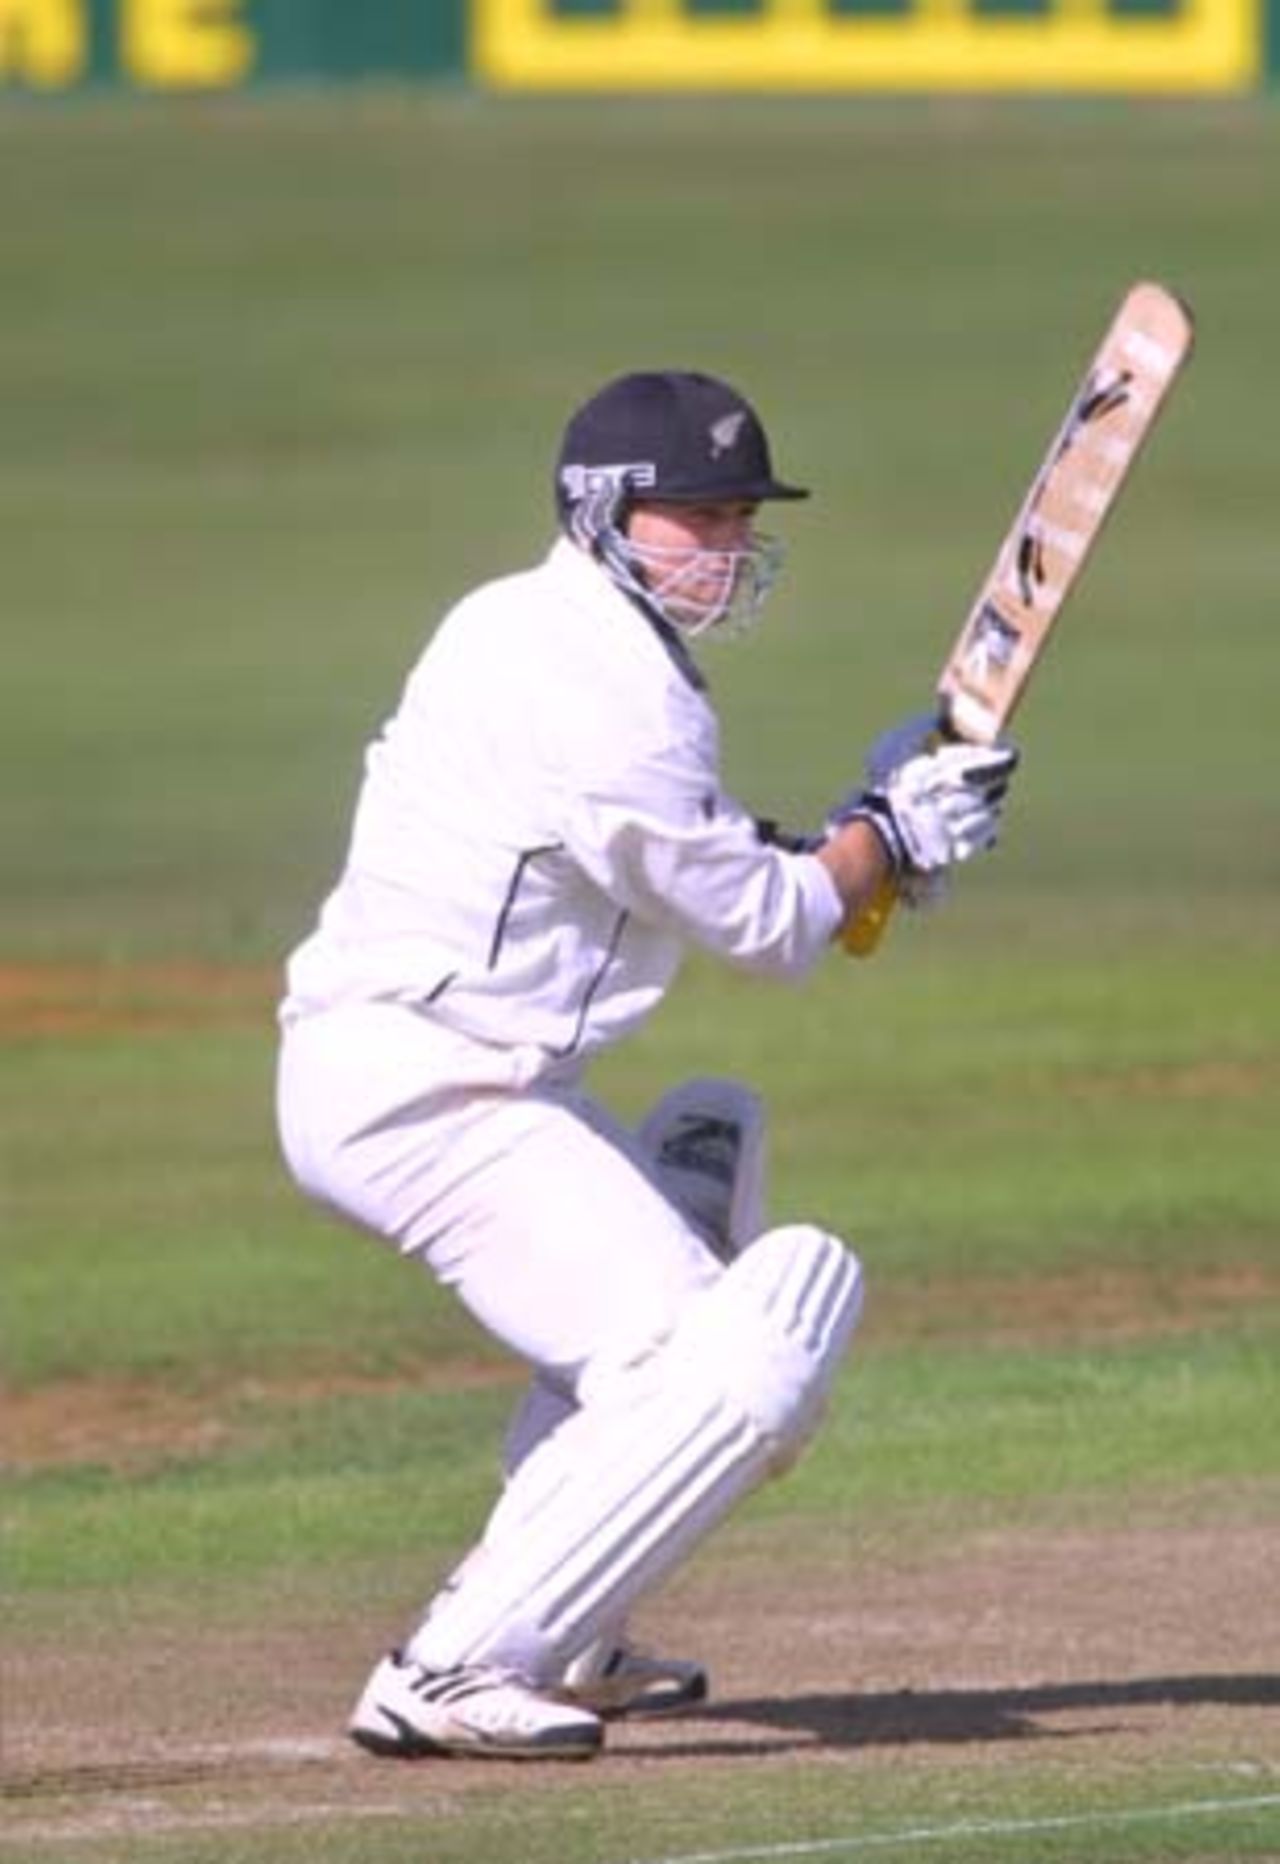 New Zealand opening batsman Matthew Bell plays a back cut during his first innings. Bell went on to score 105, his maiden Test century. 3rd Test: New Zealand v Pakistan at WestpacTrust Park, Hamilton, 27-31 March 2001 (Day 3).